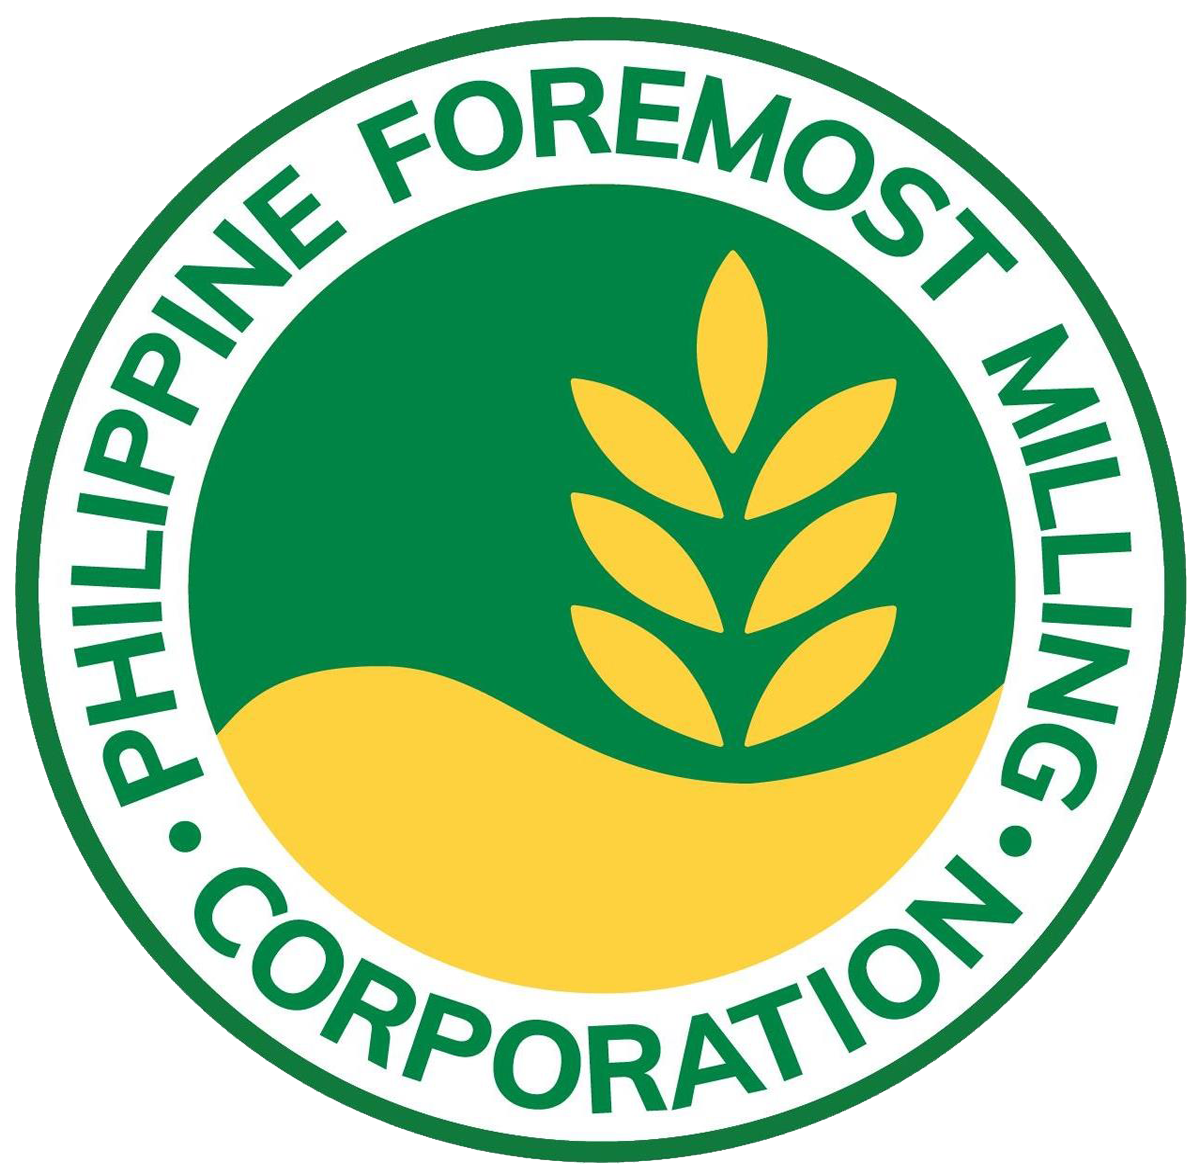 Philippine Foremost Milling Corporation